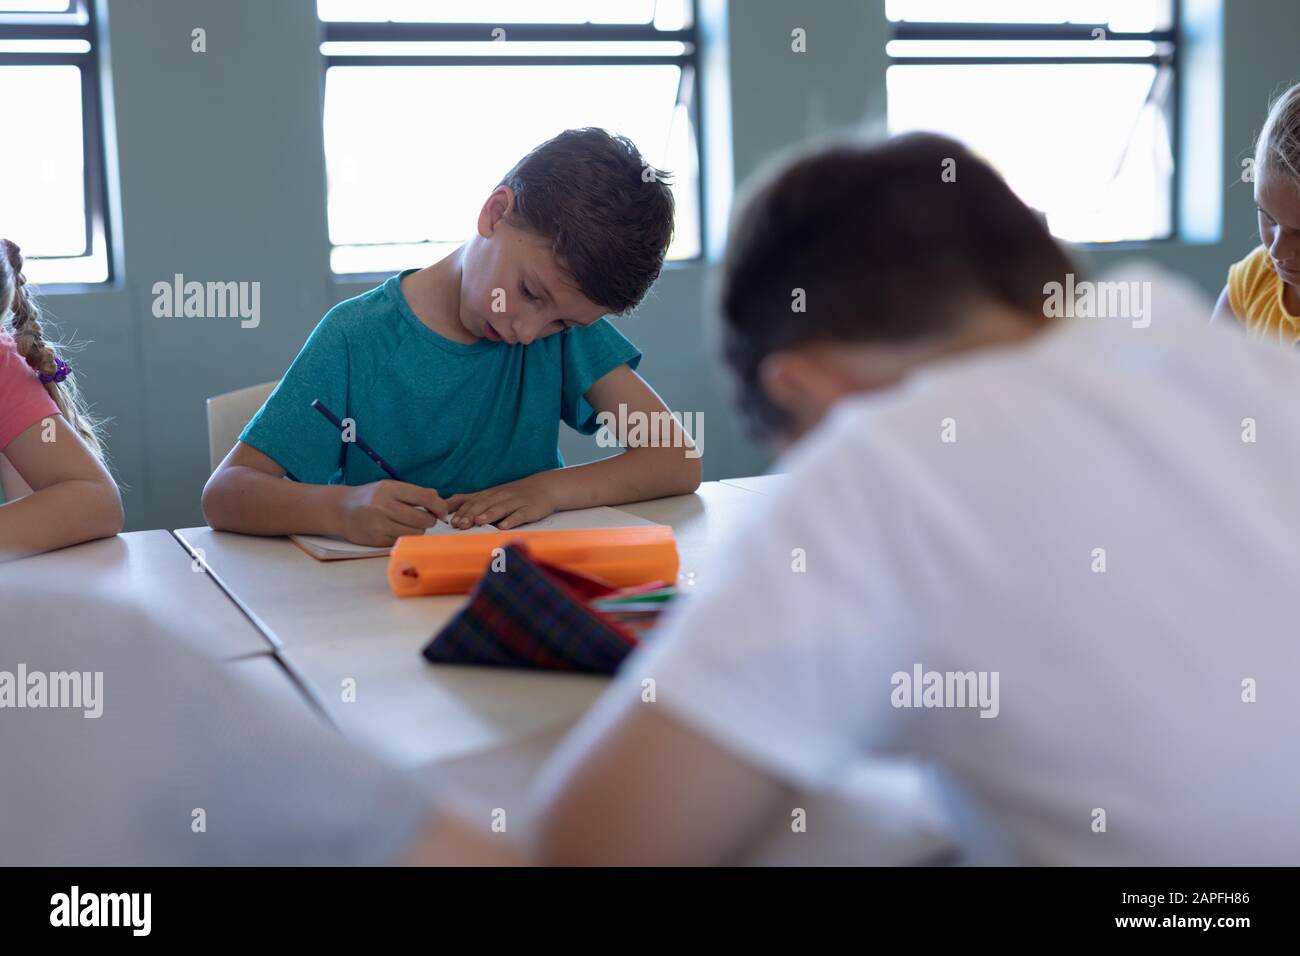 Schoolboy writing during a lesson in an elementary school classroom Stock Photo